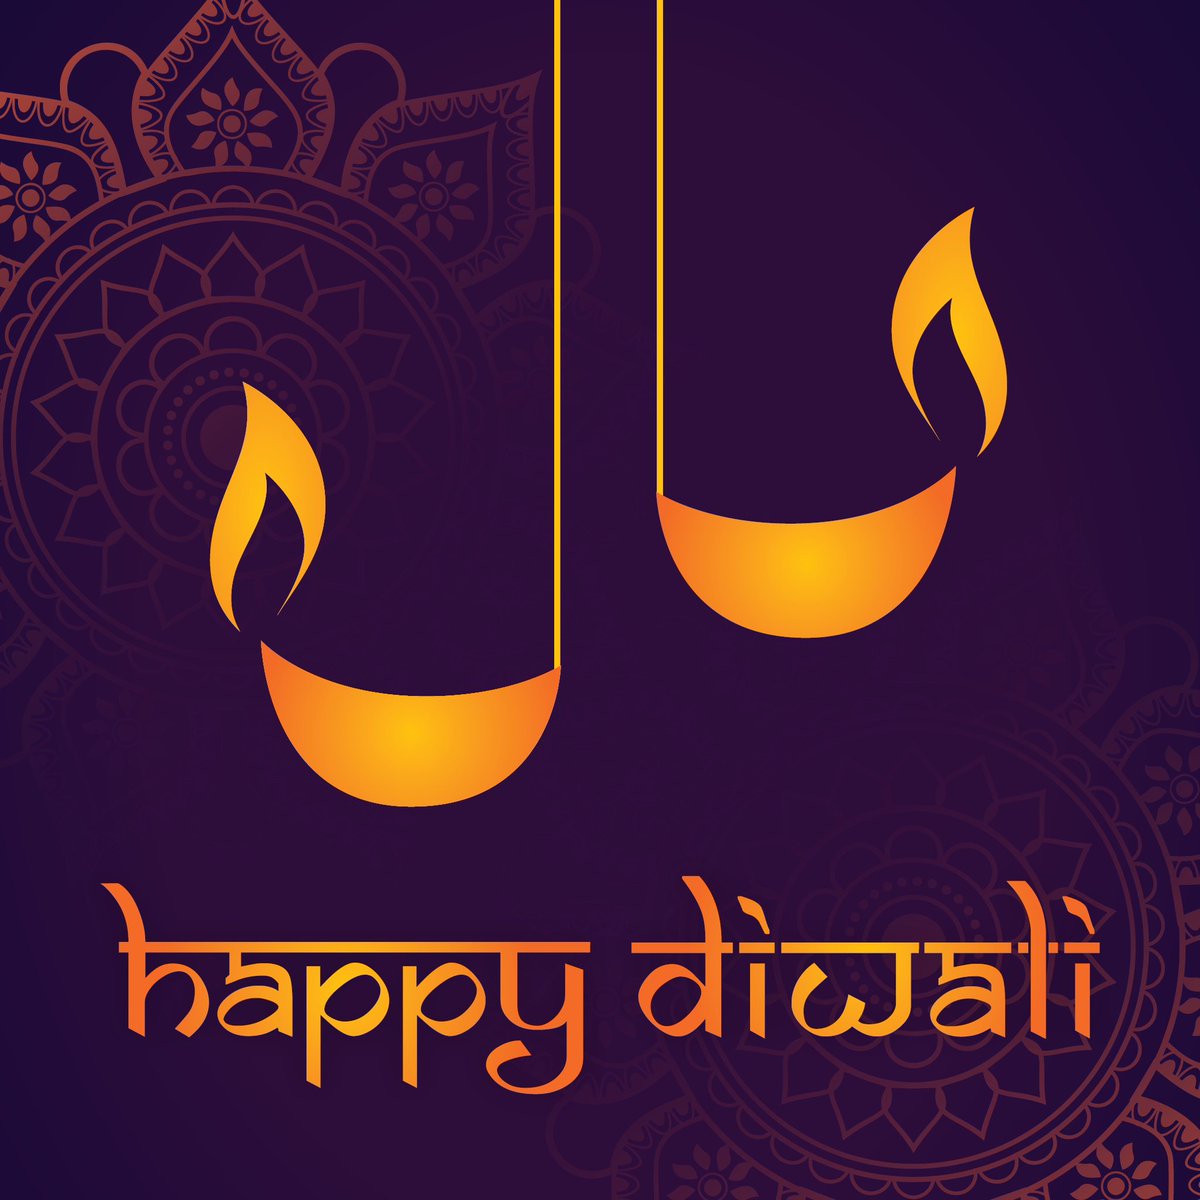 Diwali, the festival of light, is a time for celebration and also reflection. To all those celebrating Diwali, may this sacred time bring hope, prosperity and happiness.